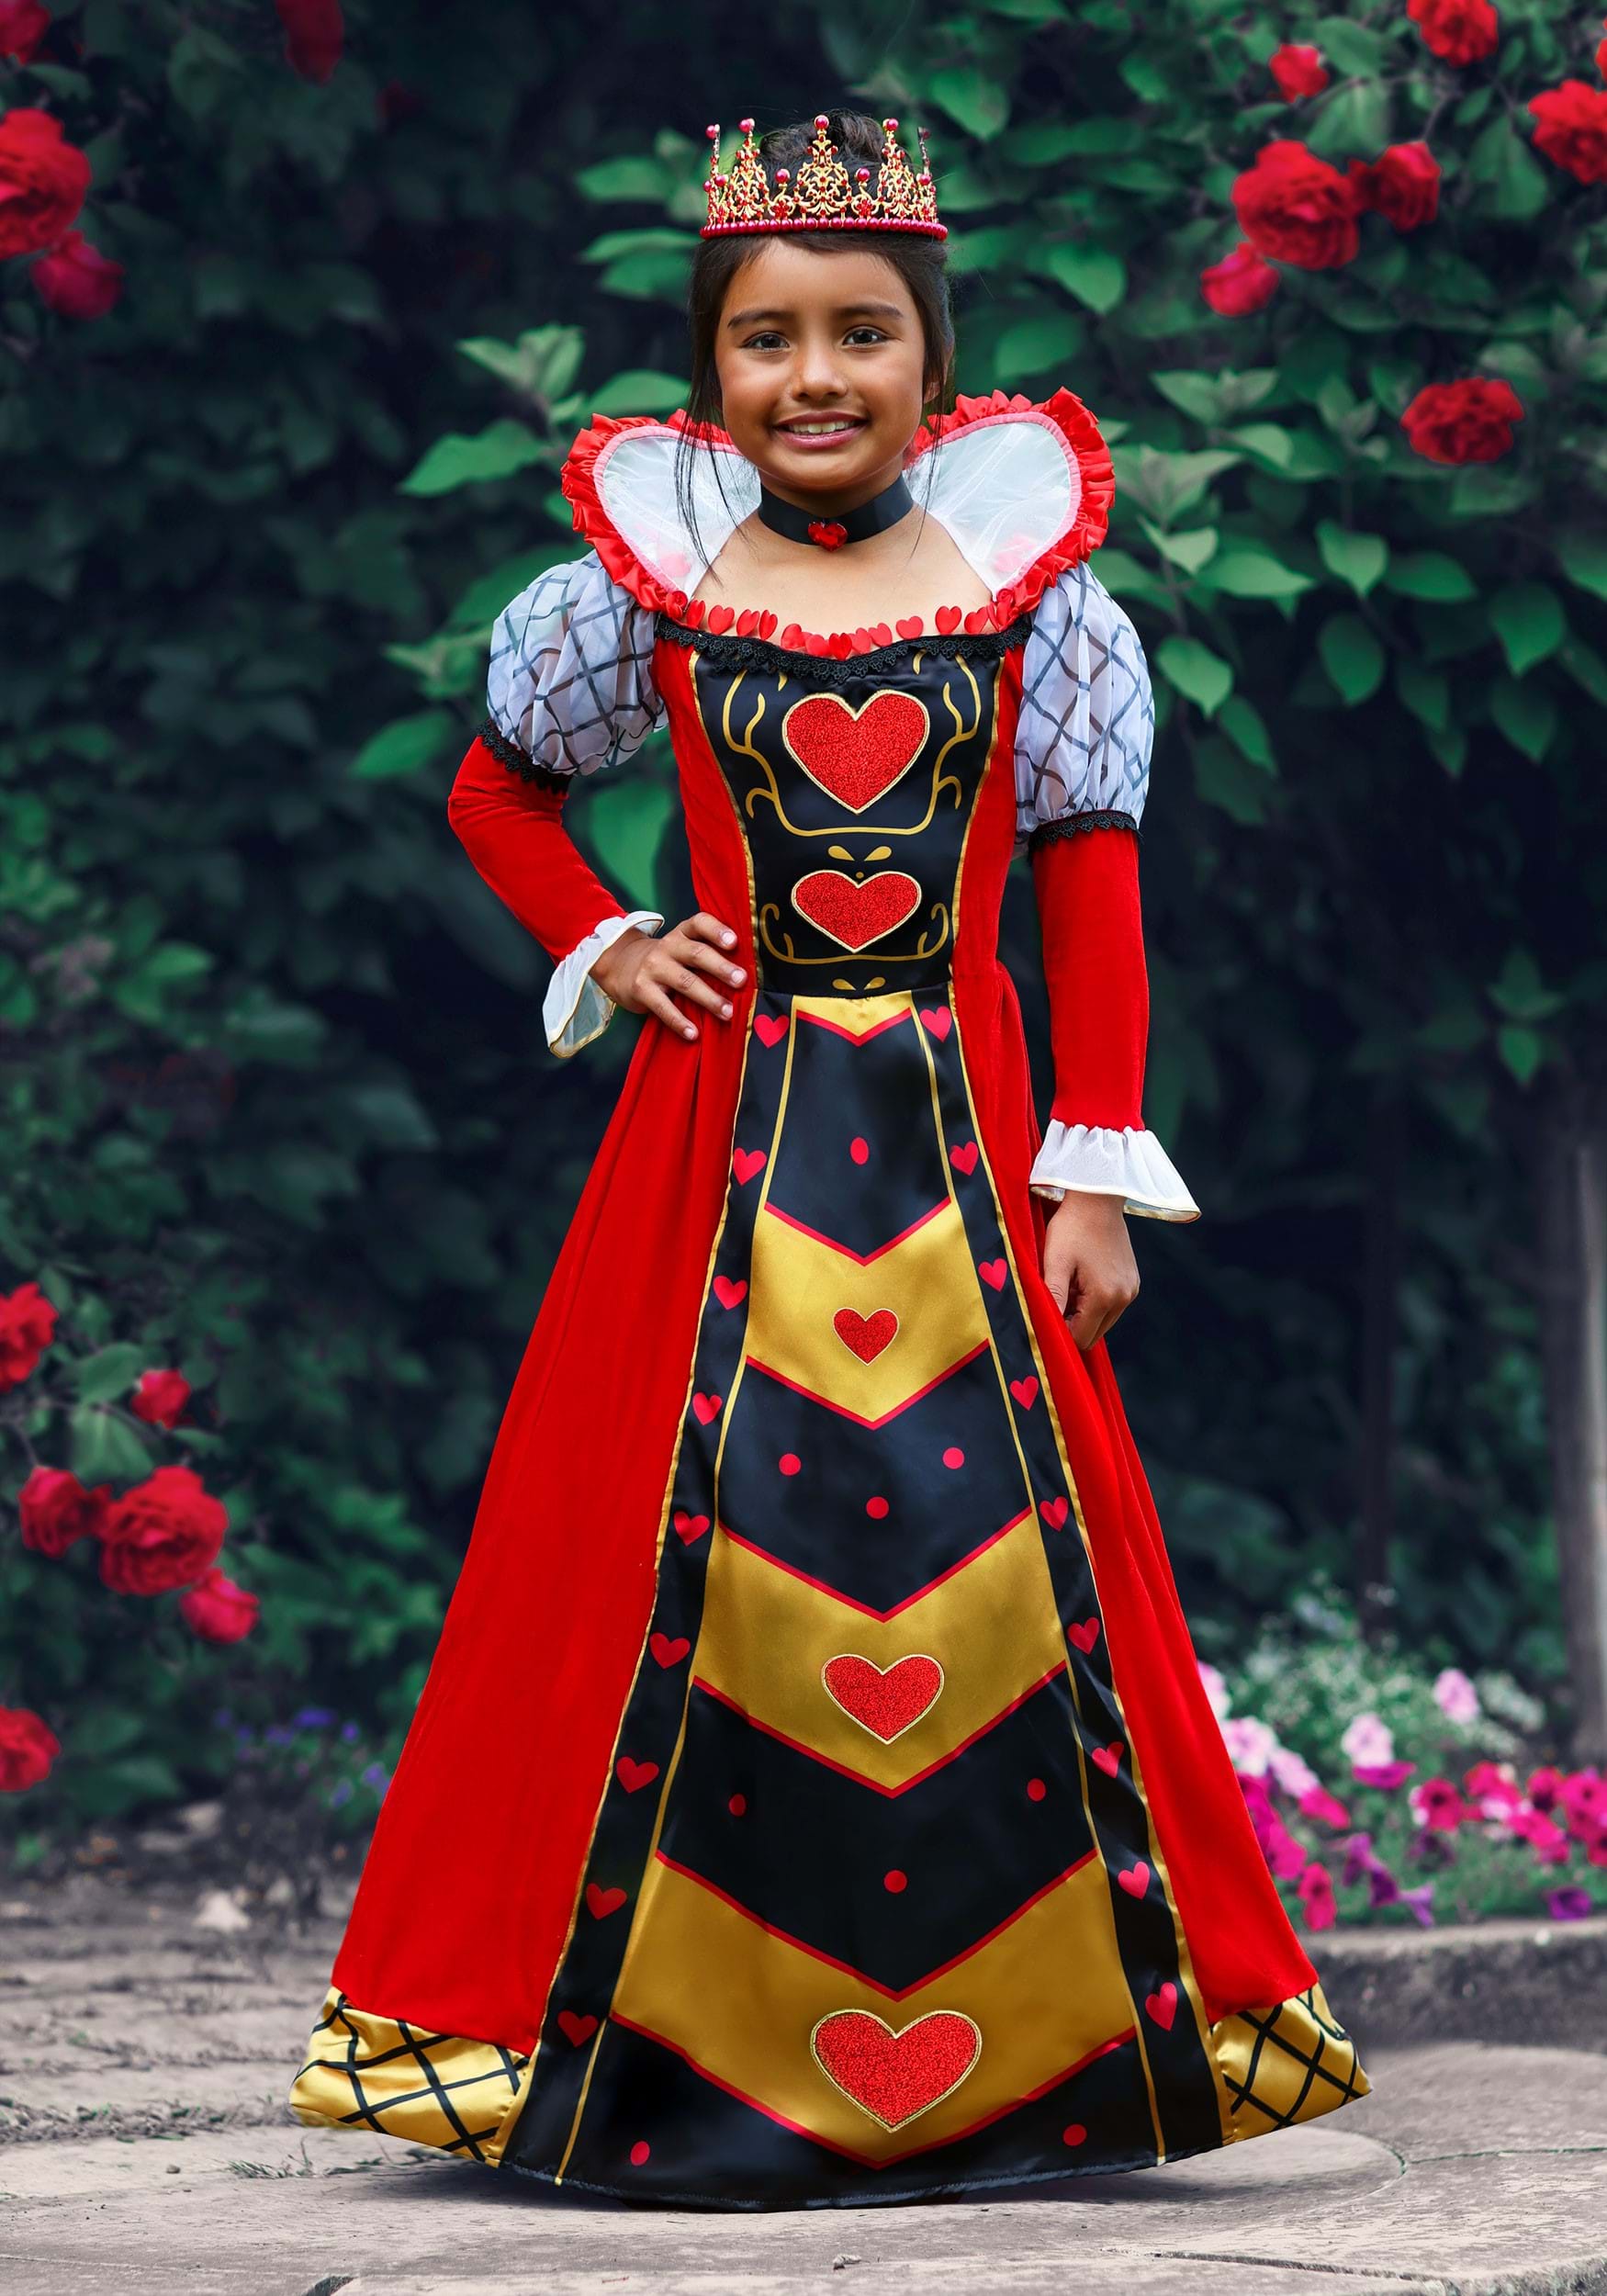 Queen of Hearts Costumes - Plus Size, Child, Adult Queen of Heart Costumes